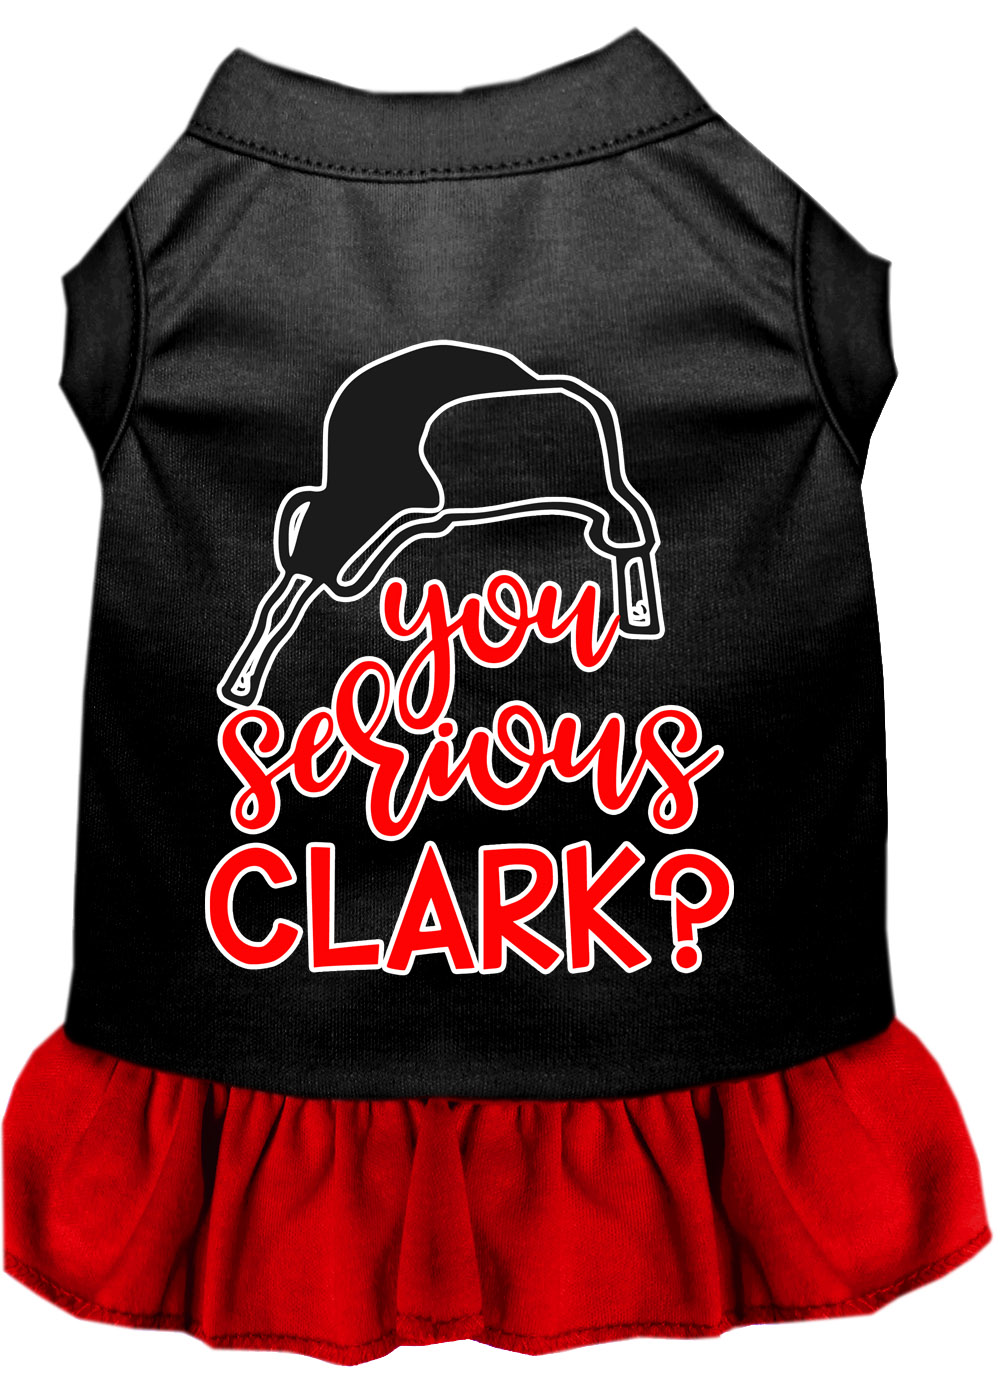 You Serious Clark? Screen Print Dog Dress Black with Red XL